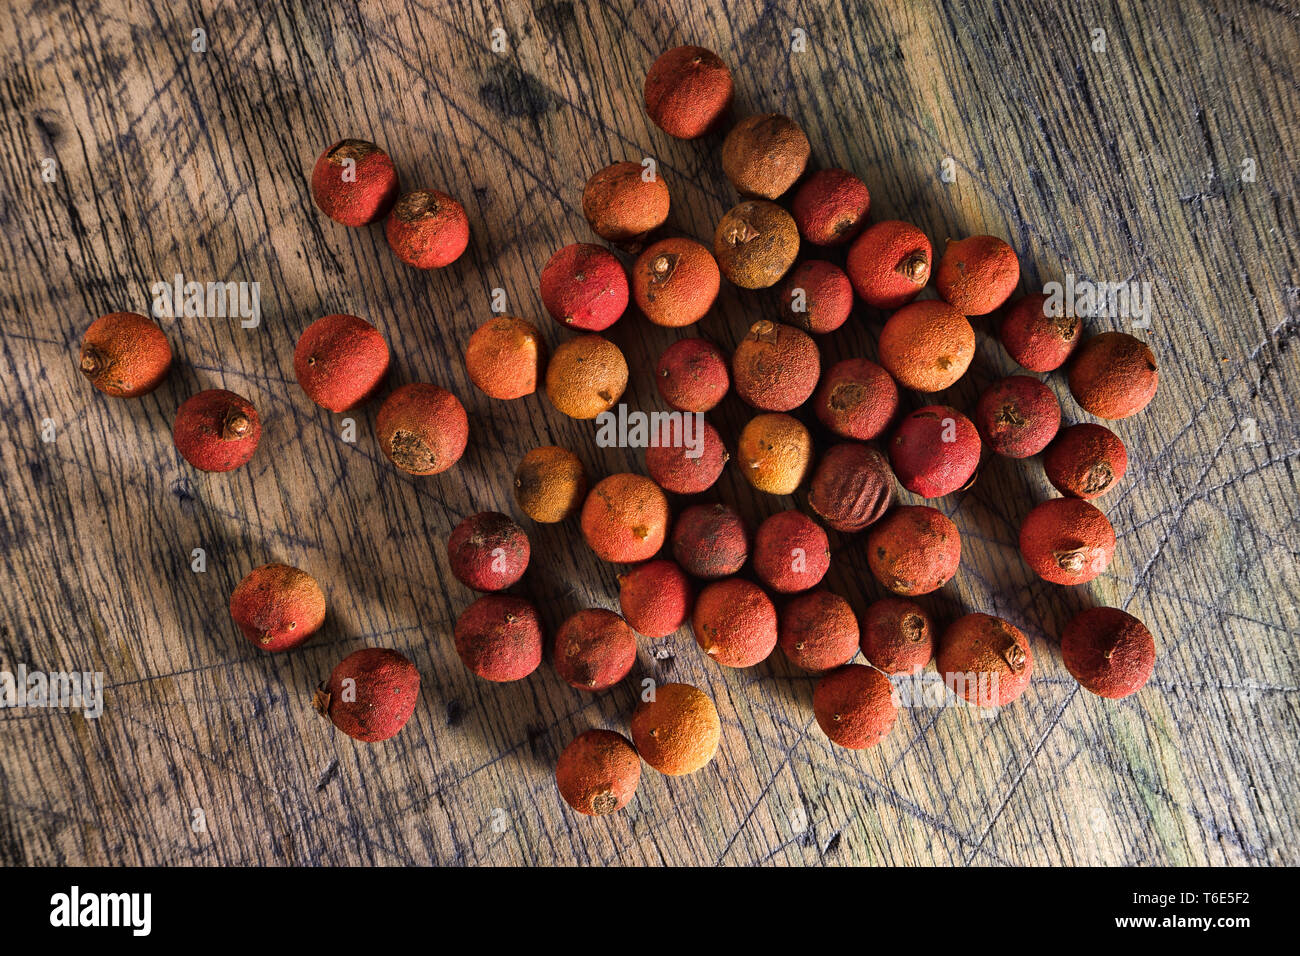 corozo palm tree nuts in Colombia Stock Photo